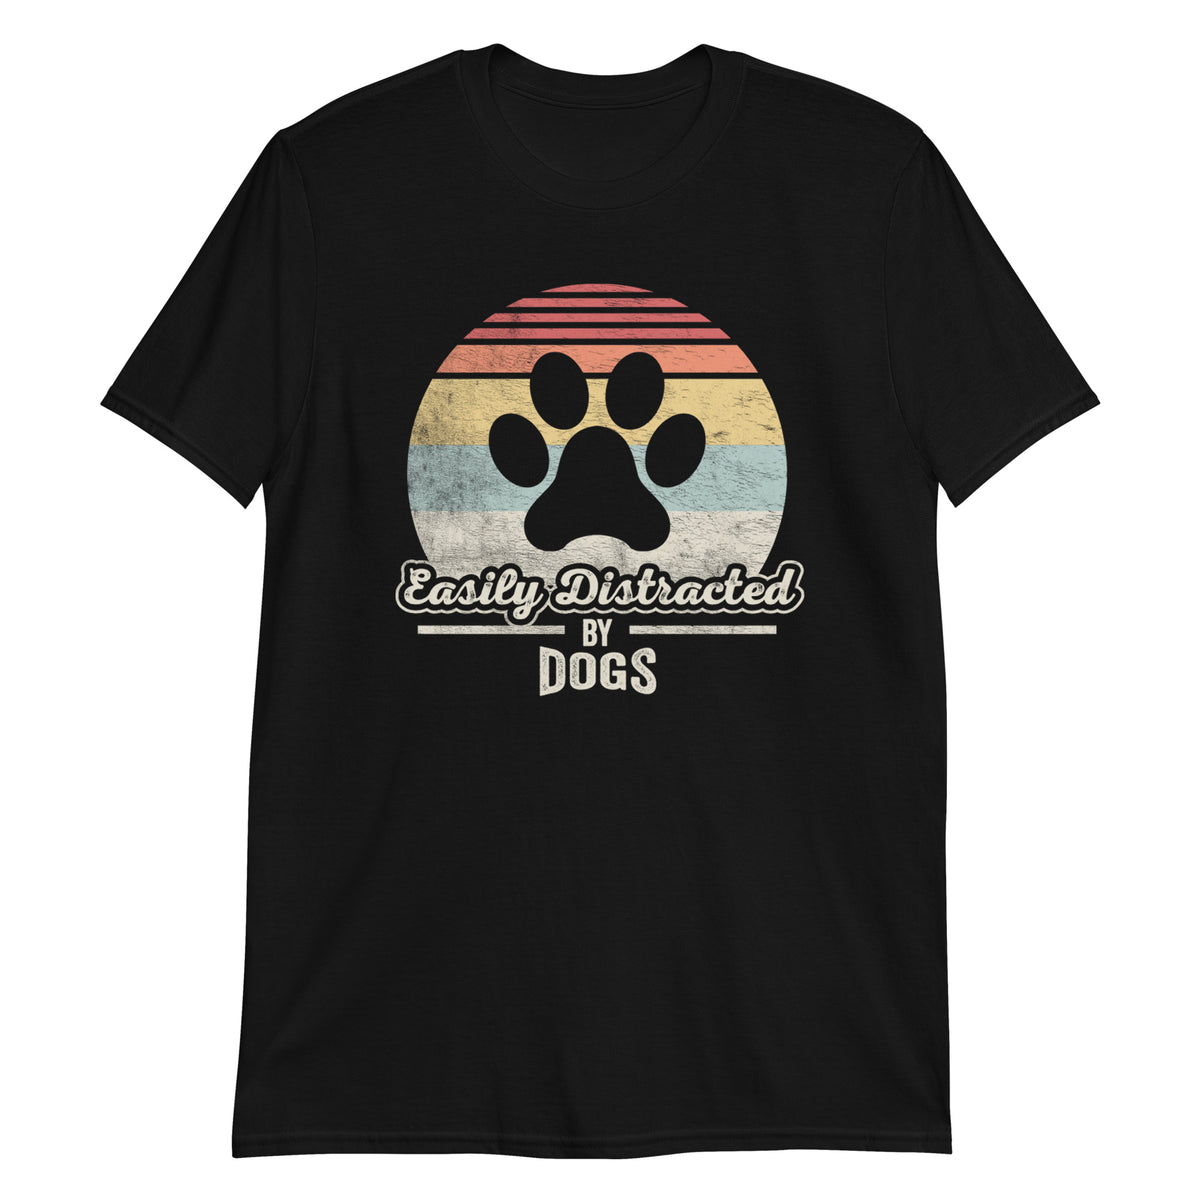 Easily Distracted By Dogs Funny Dog Lover Retro Vintage T-shirt